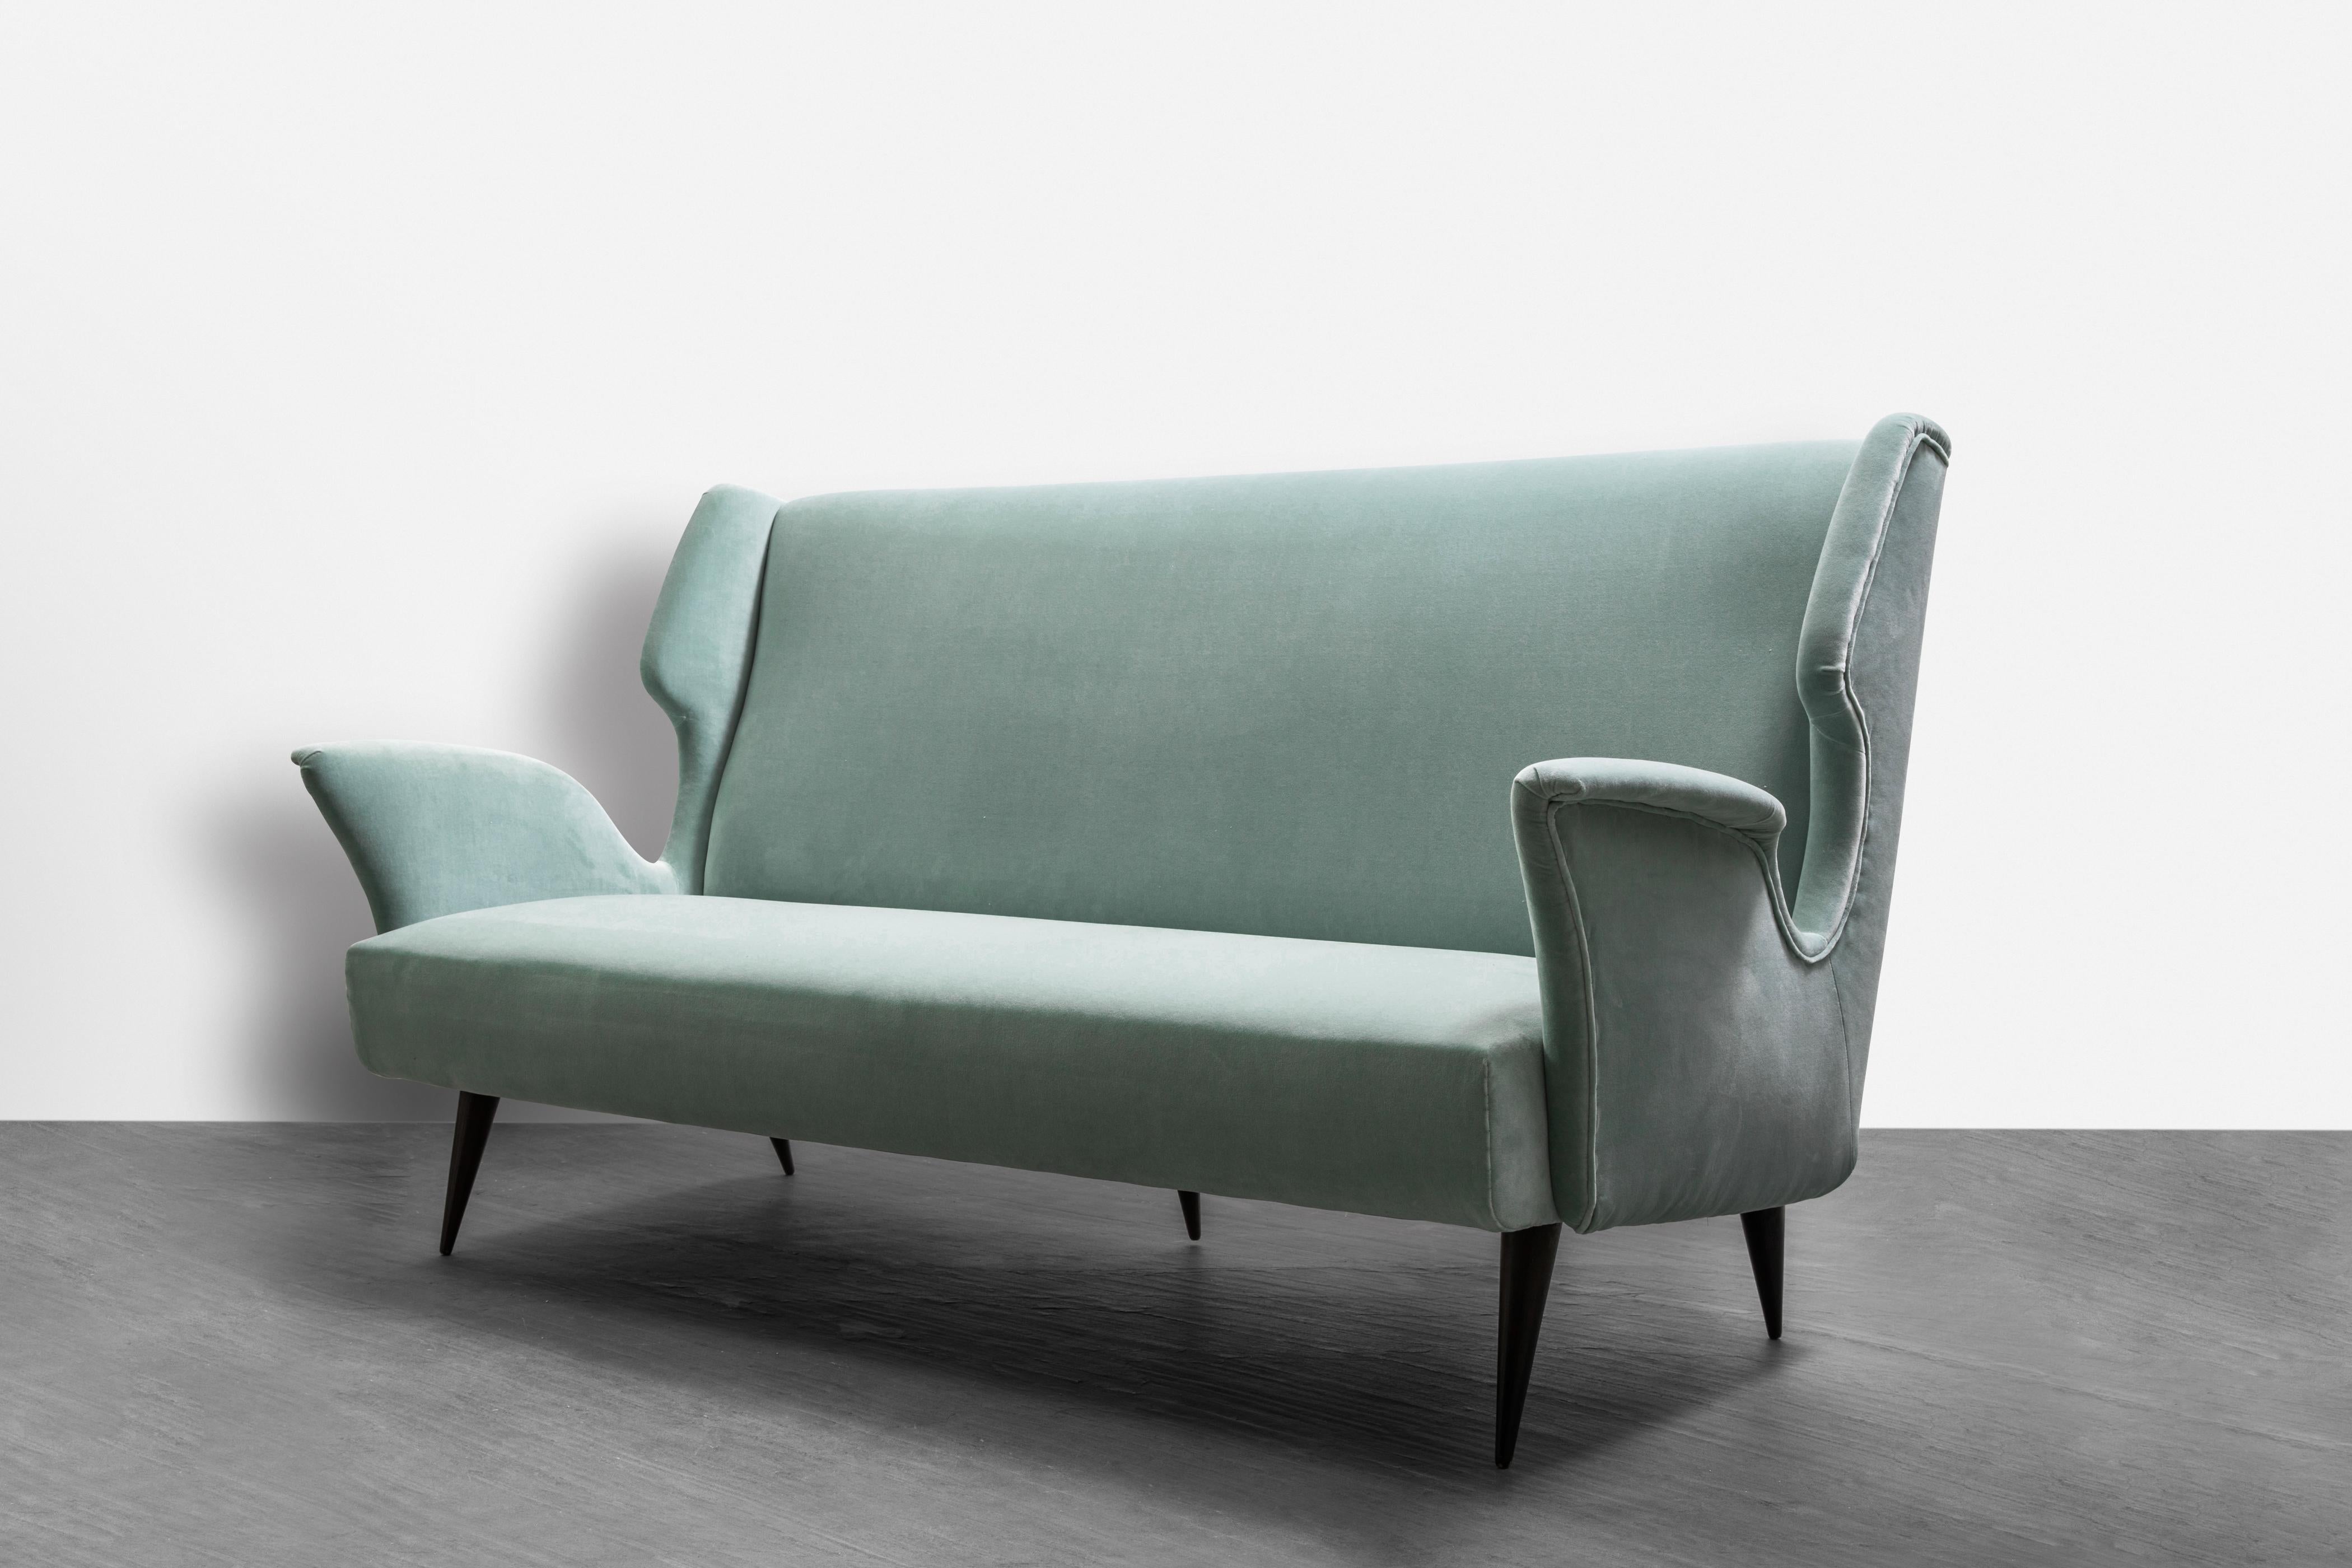 A rare and elegant set by Melchiorre Bega, architect and designer, who was active between the 1930s and 60s, arguably did as much as many better-known designers to put his stamp on the urban and domestic world of design we inhabit today. 

His